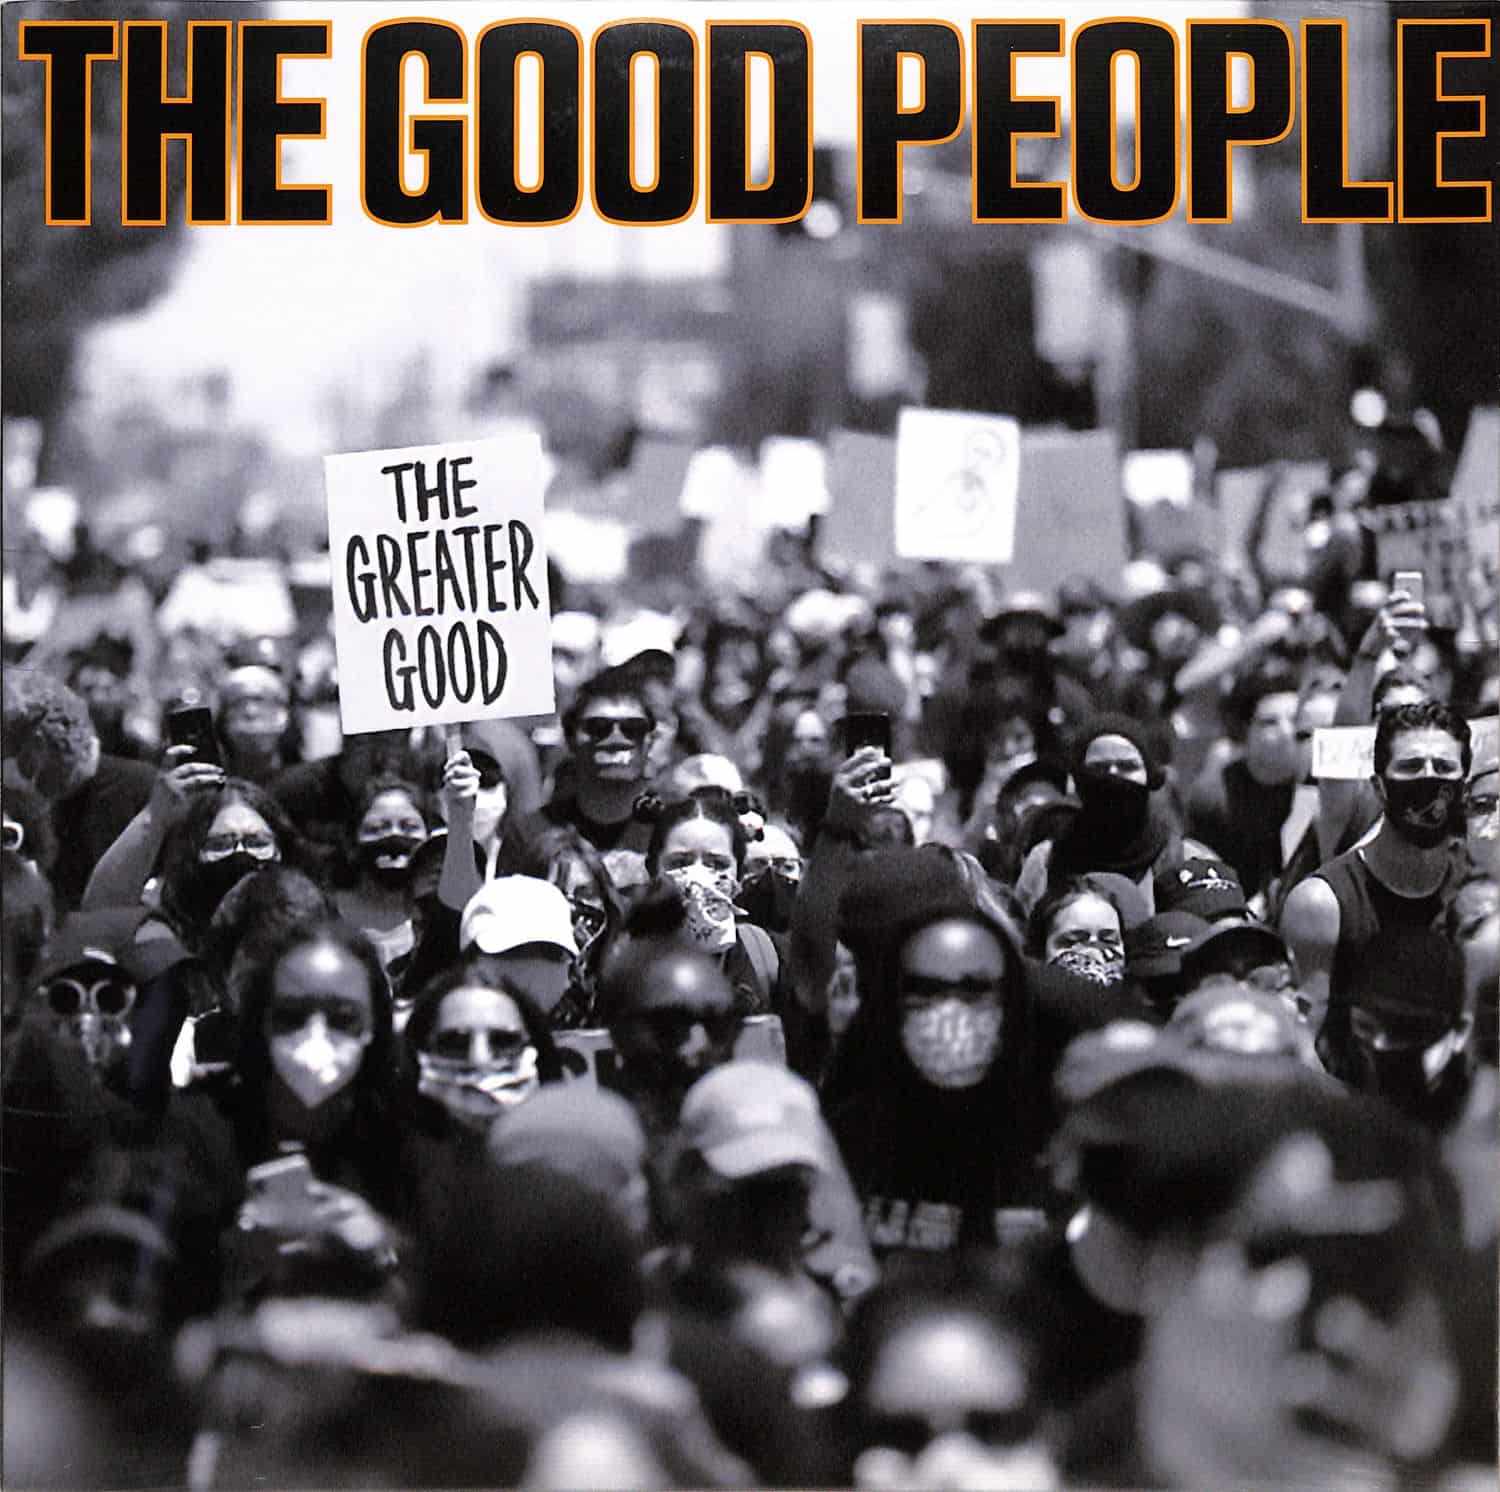 The Good People - THE GREATER GOOD 